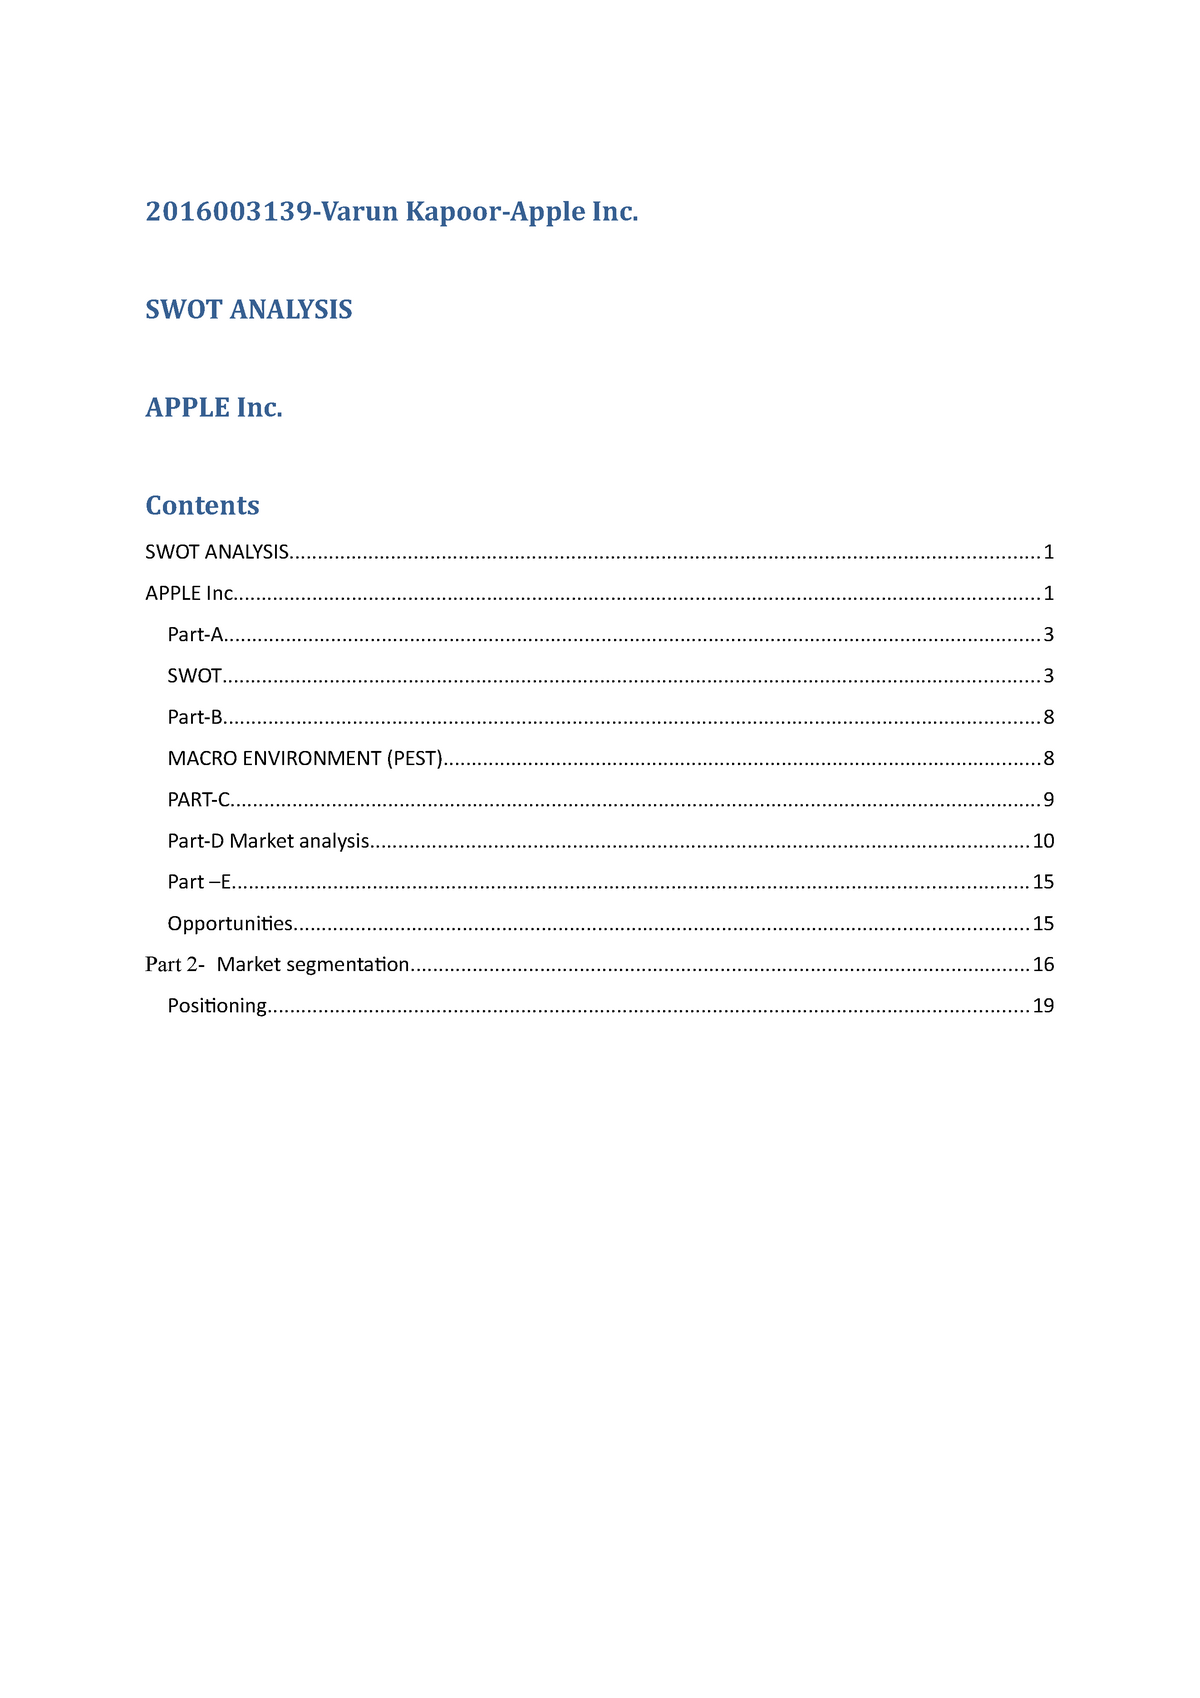 swot and pest analysis of apple